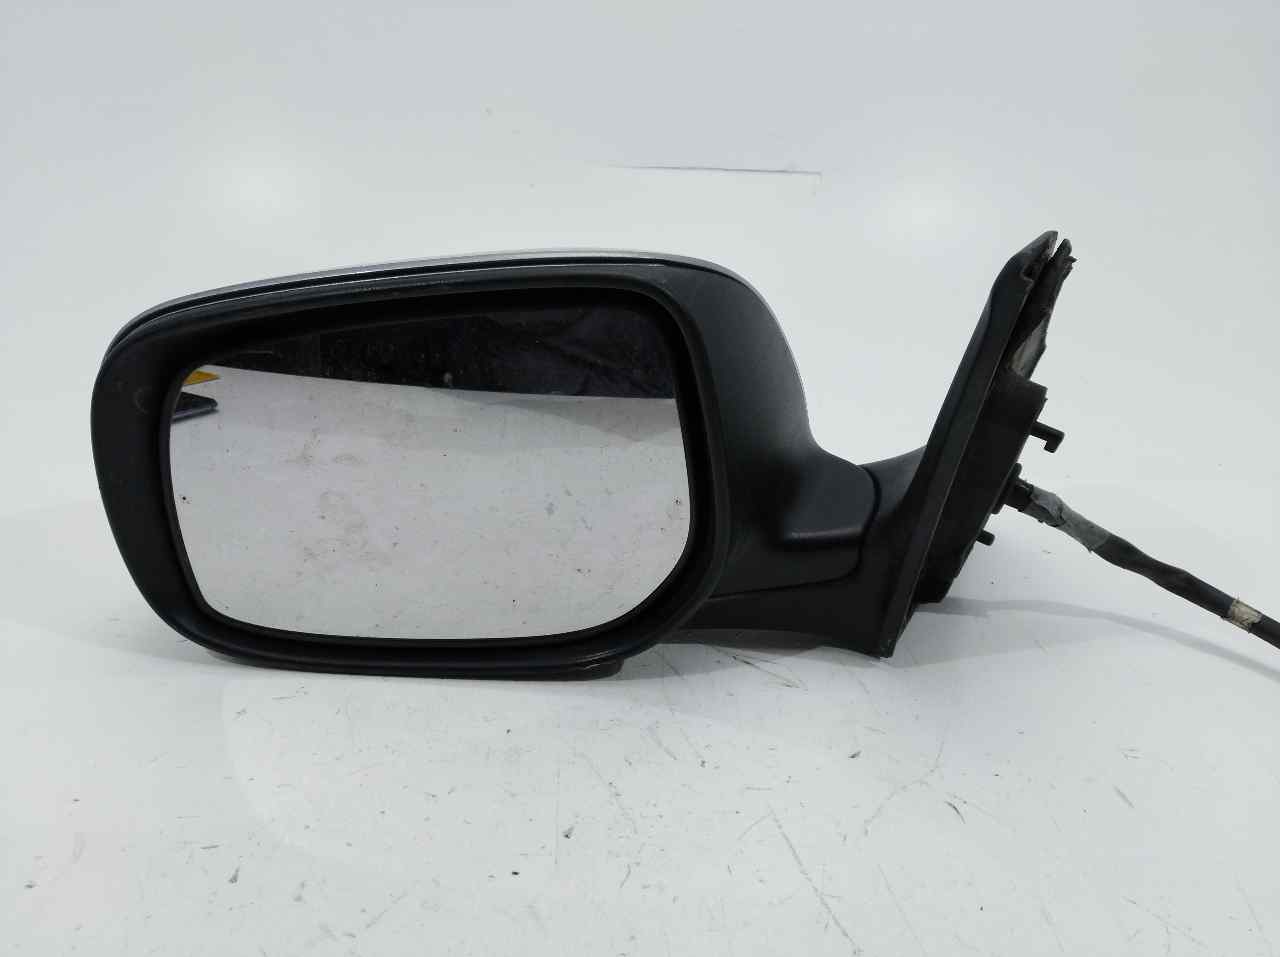 TOYOTA Avensis 2 generation (2002-2009) Left Side Wing Mirror 8790905390A0, 8790905390A0, 8790905390A0 24513150